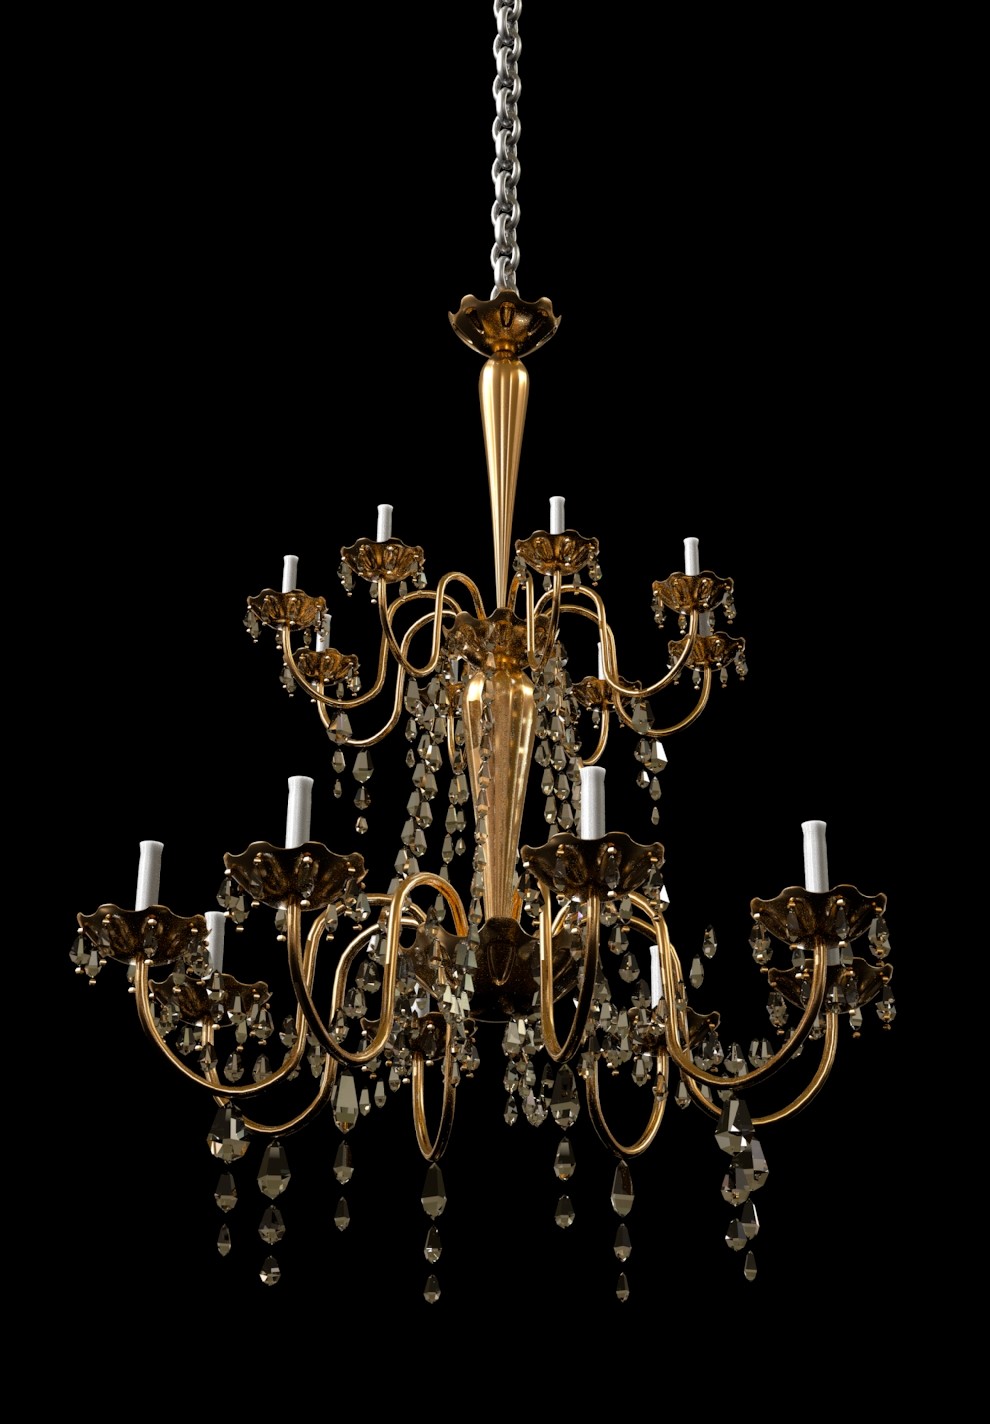 Chandelier made for this particular scene. This was mostly speed modeled so the details may be rough but were intended for a far away object.